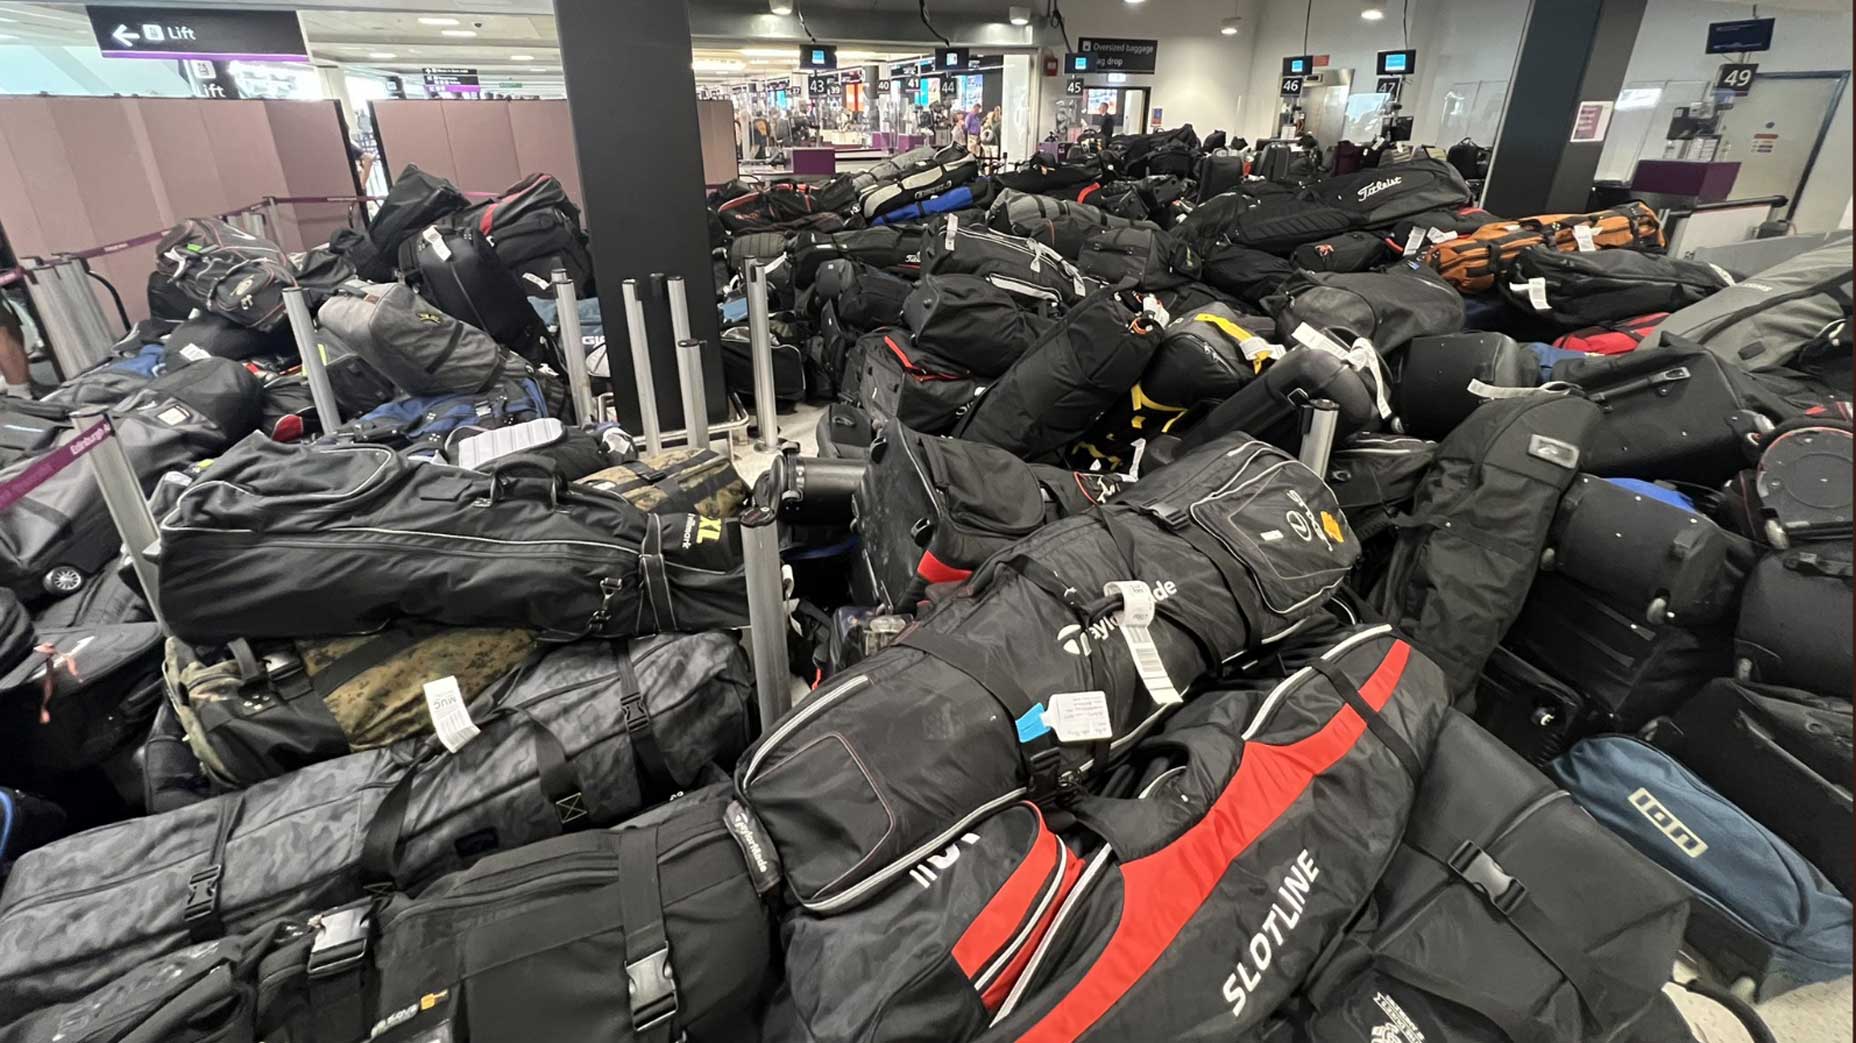 Golf bags piling up at U.K. airports after Open Championship